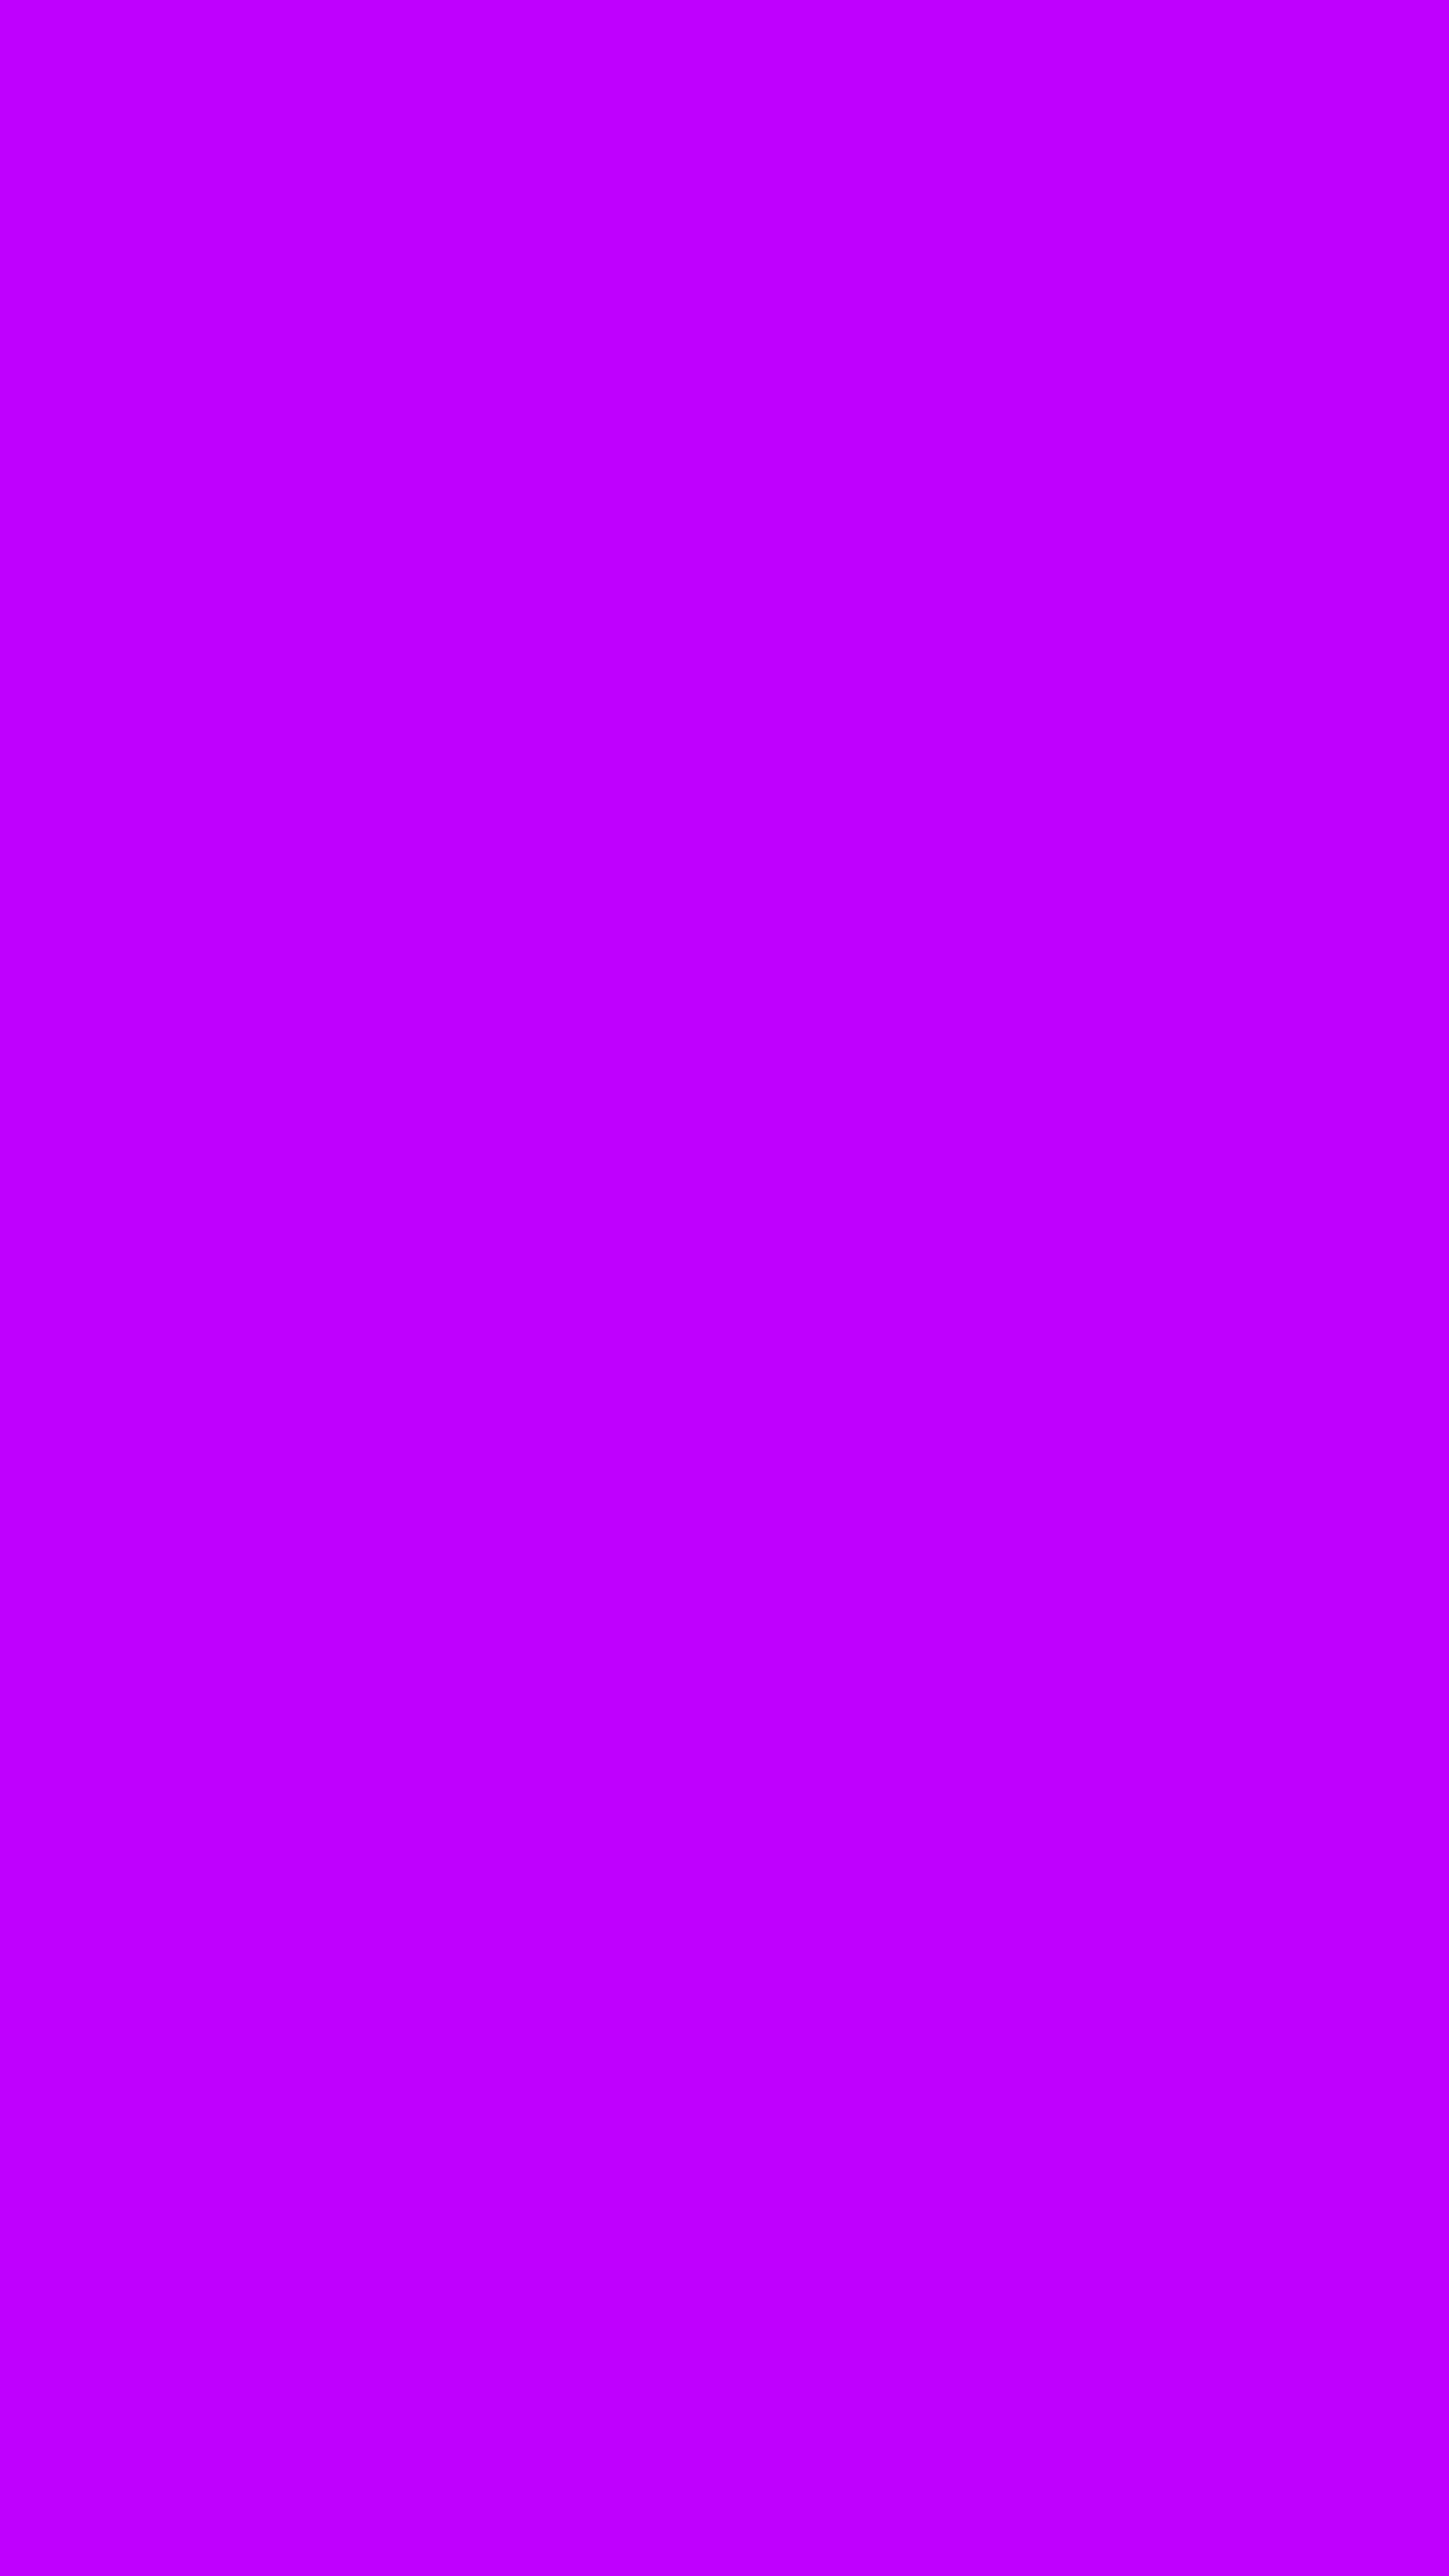 Electric Purple Solid Color Background Wallpaper for Mobile Phone